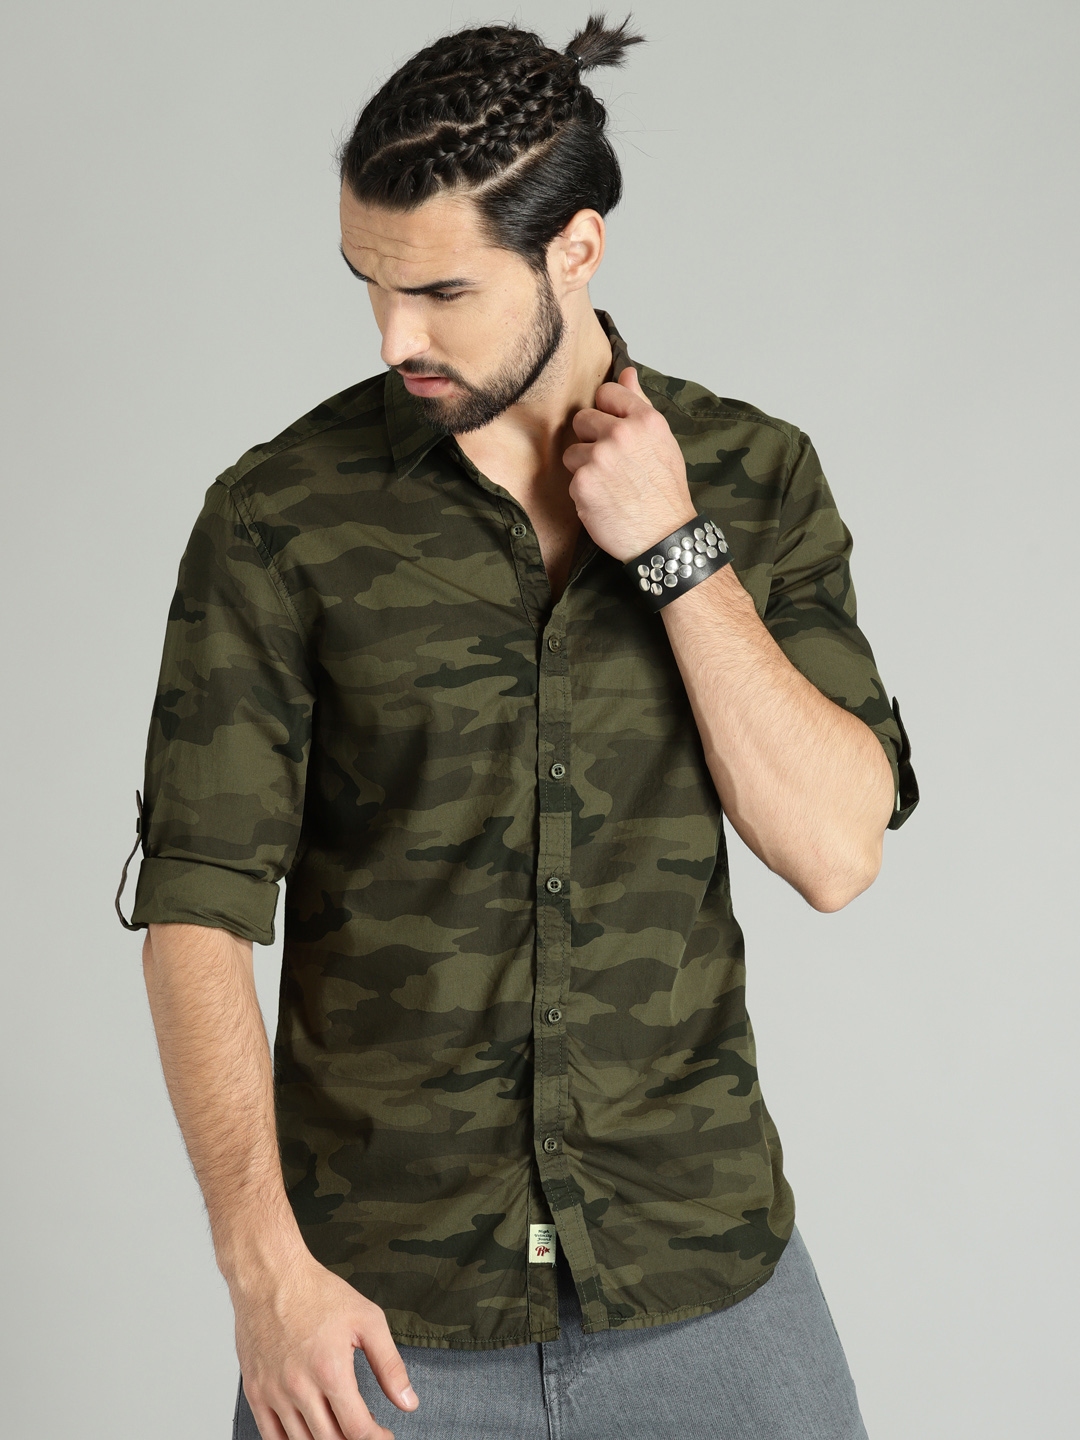 Roadster Men Grey & Olive Green Camouflage Printed Casual Sustainable Shirt